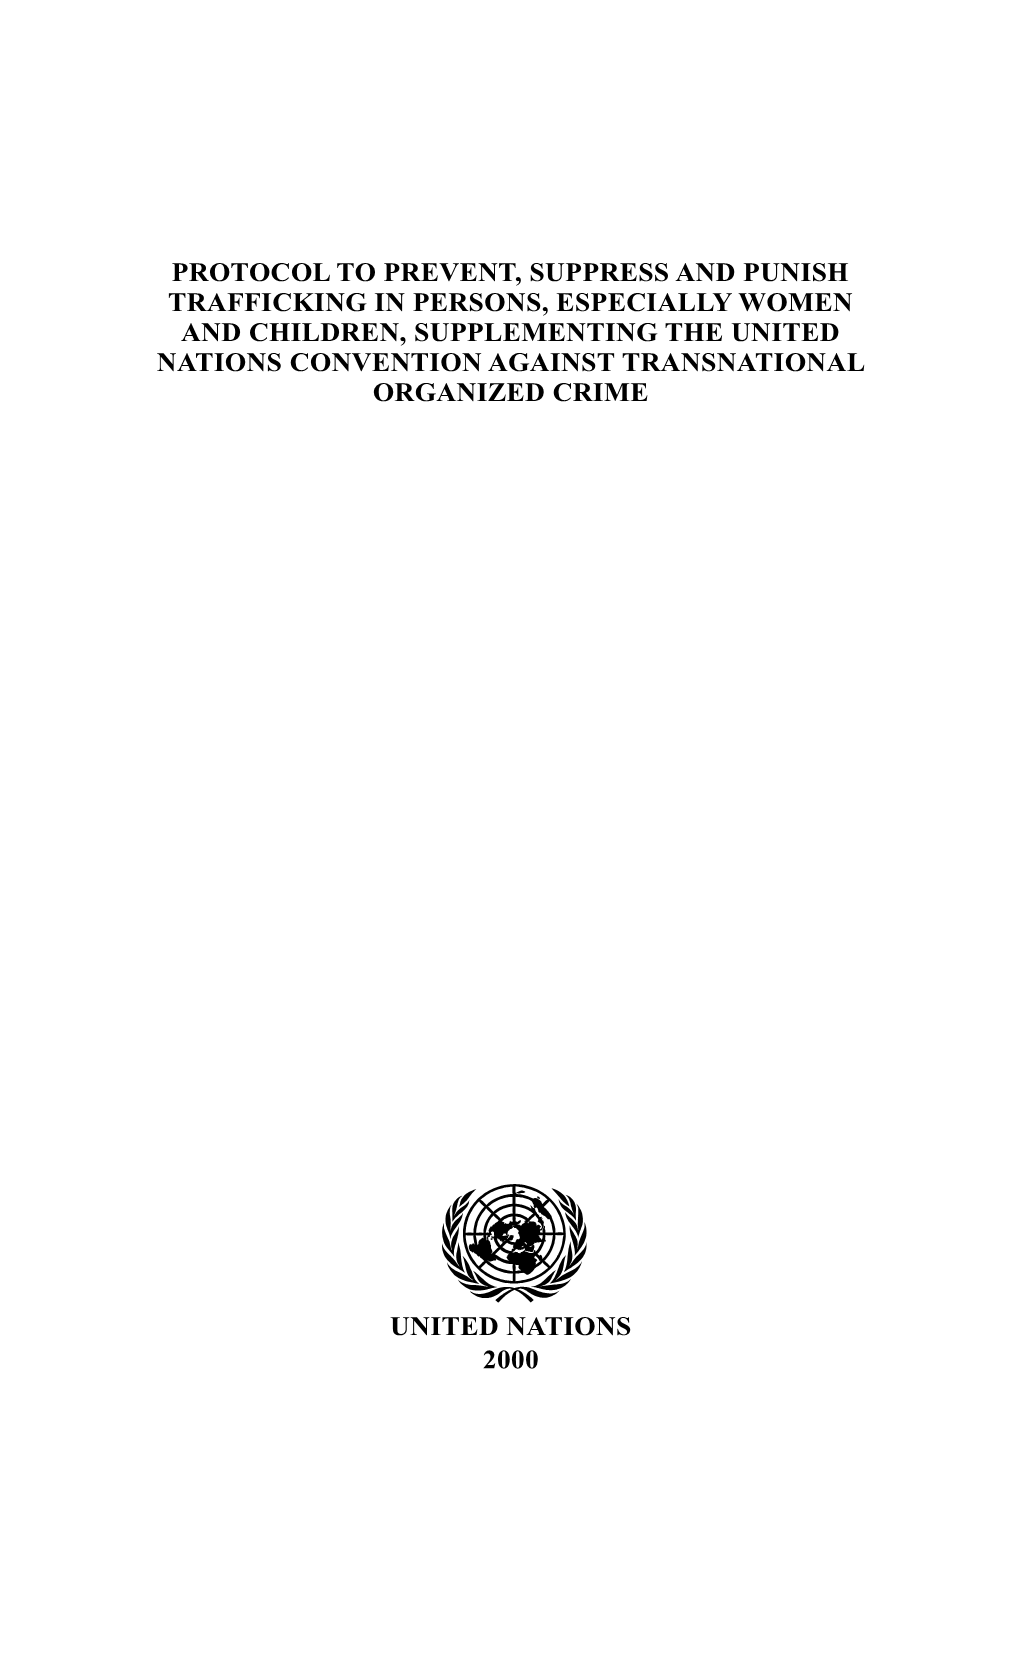 Protocol to Prevent, Suppress and Punish Trafficking in Persons, Especially Women and Children